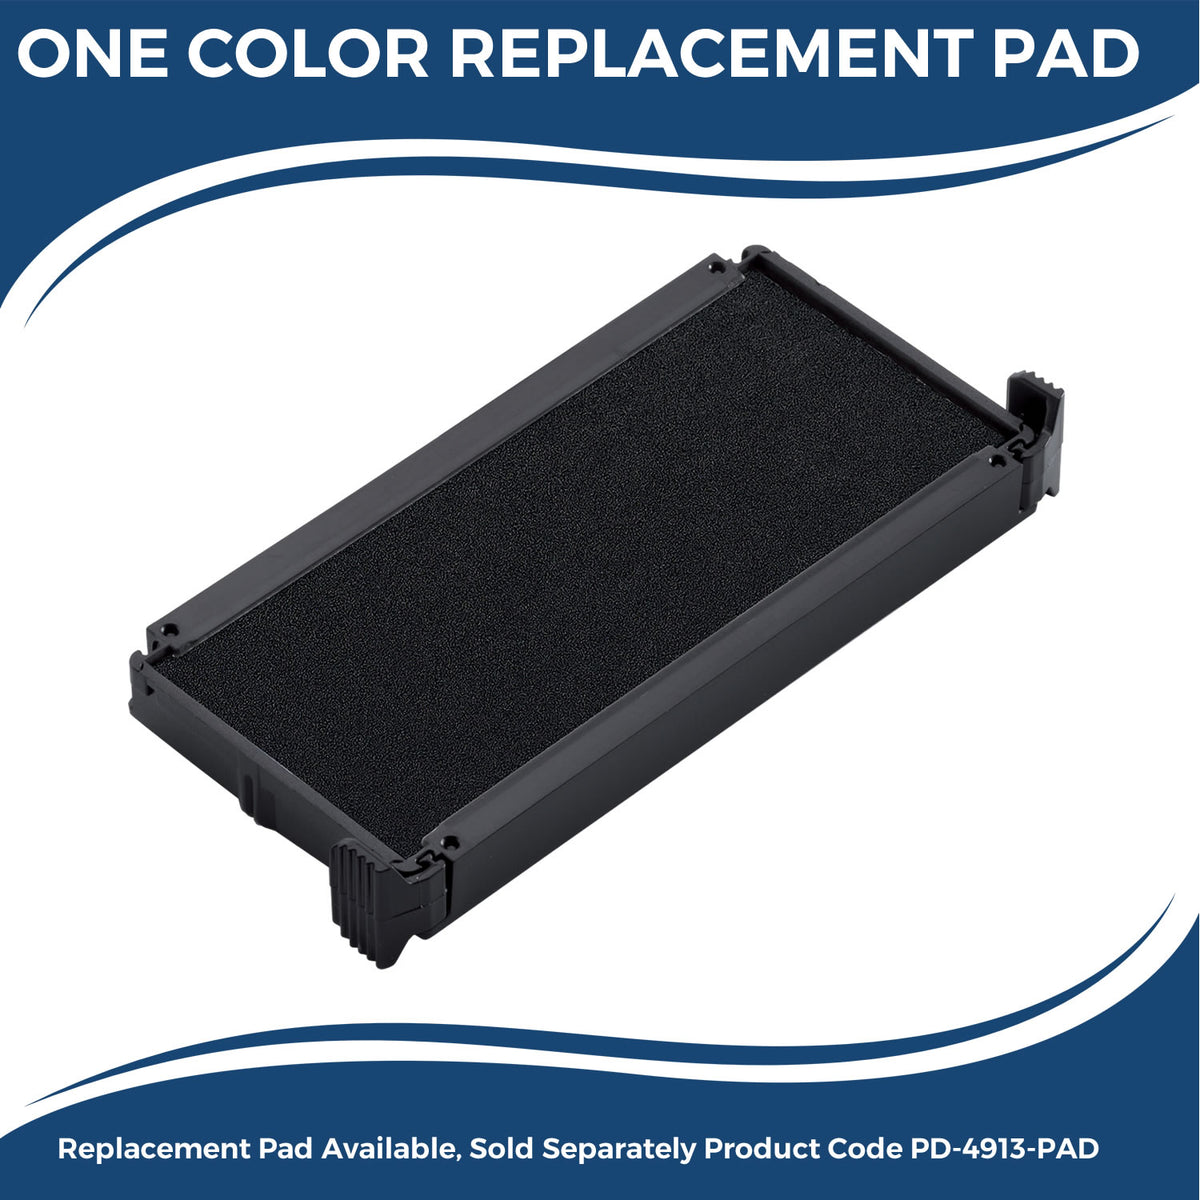 Large Self Inking Approved For Payment Stamp 4104S Large Replacment Pad